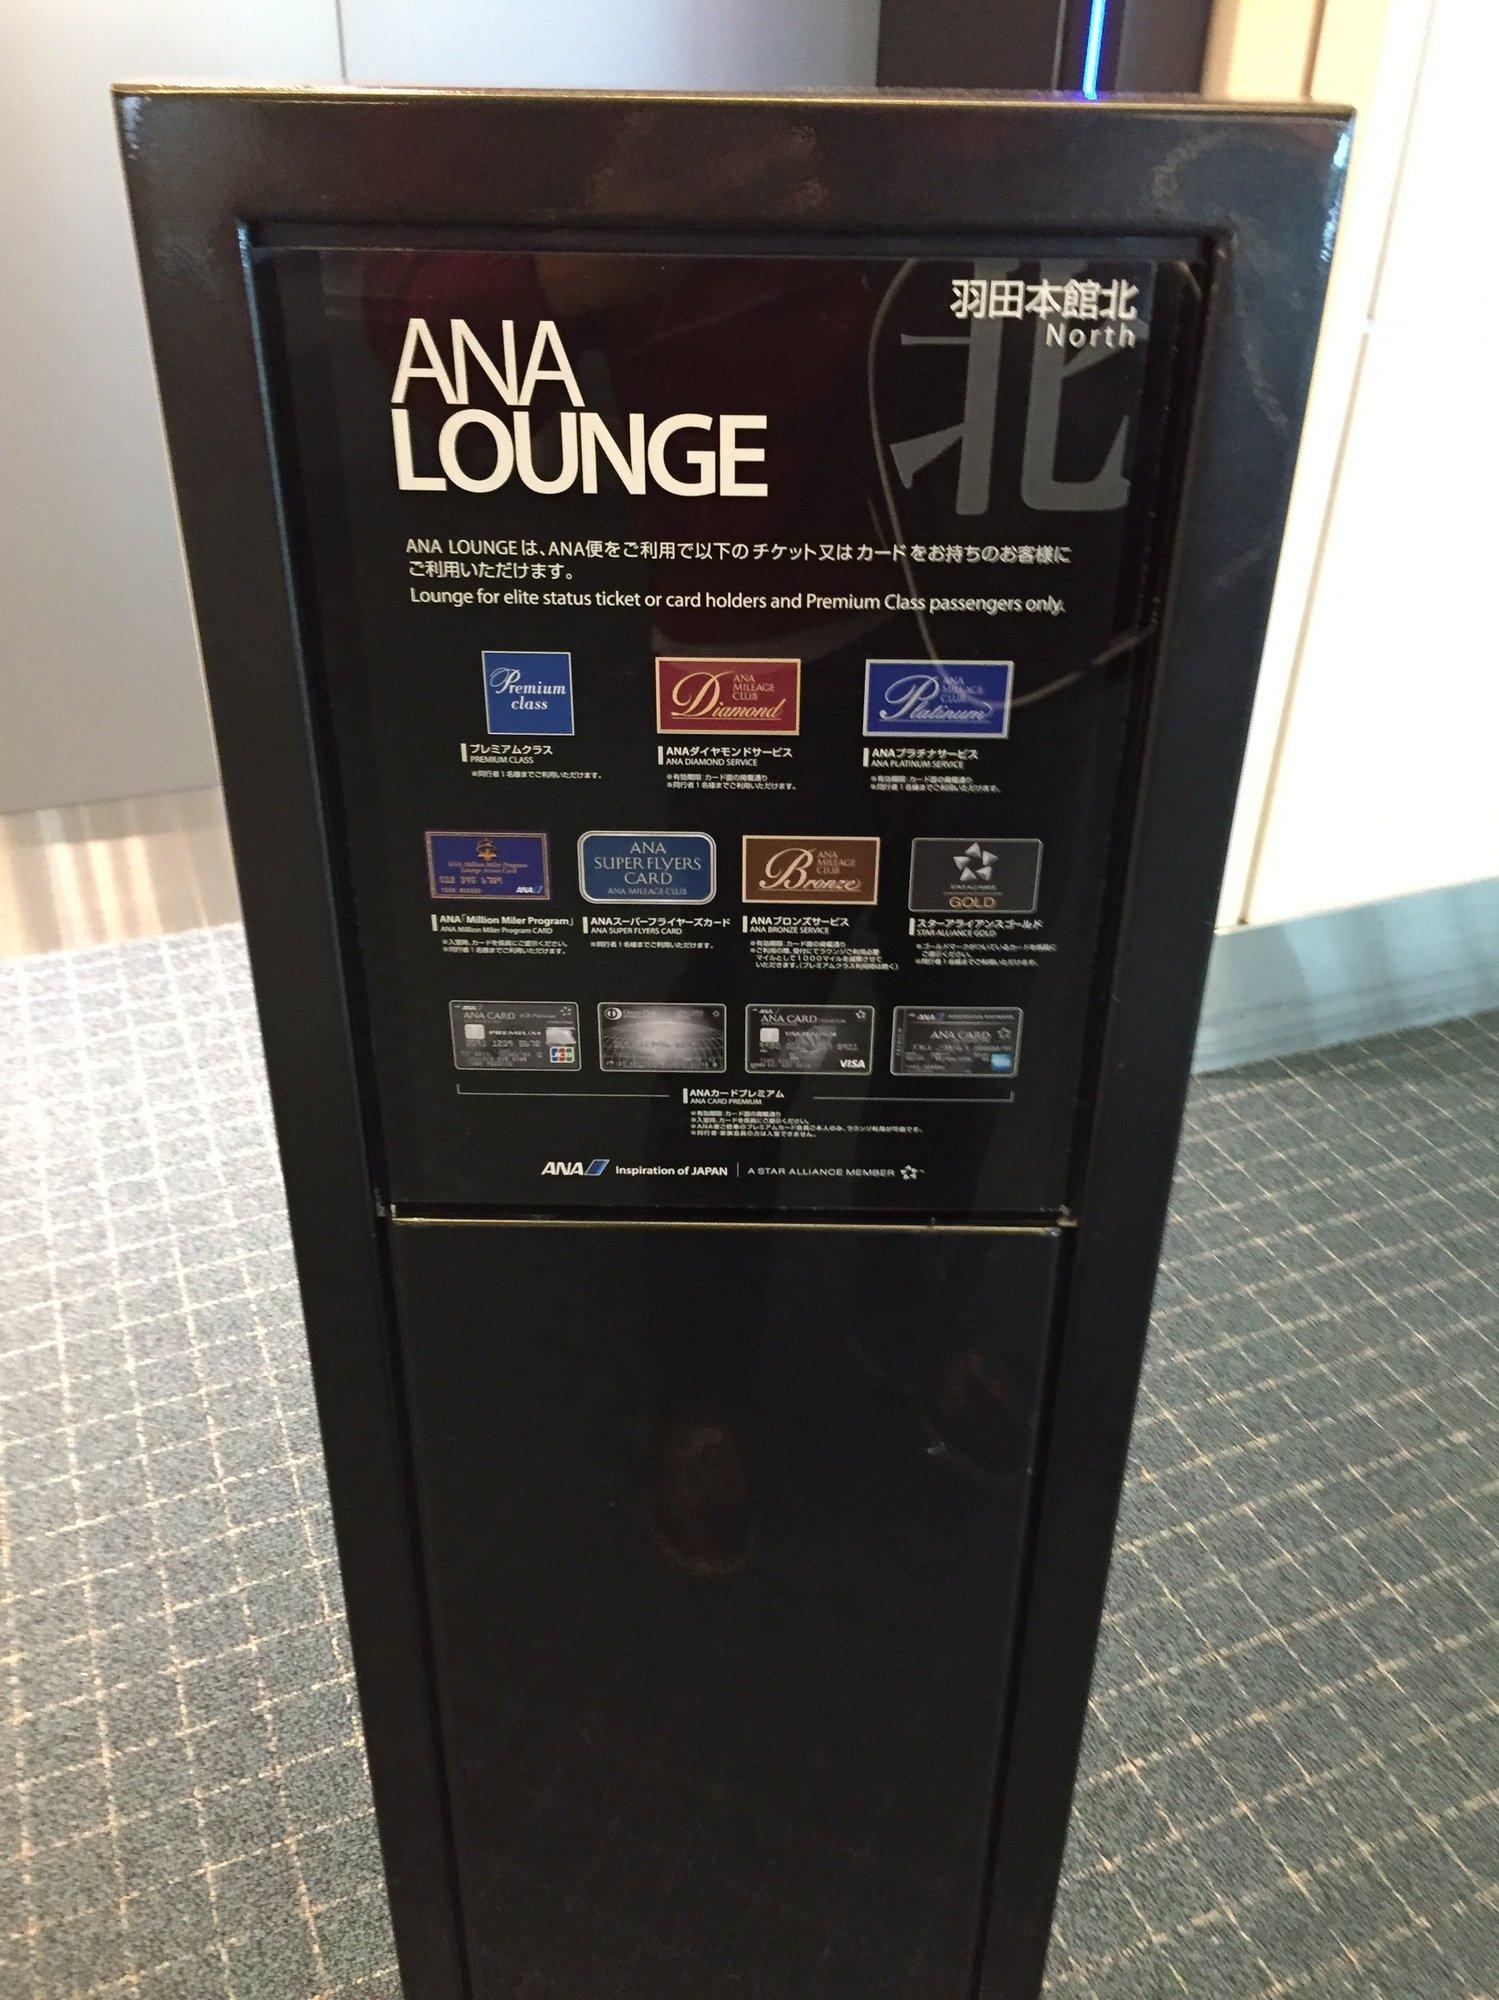 All Nippon Airways ANA Lounge (Gate 60) image 5 of 10